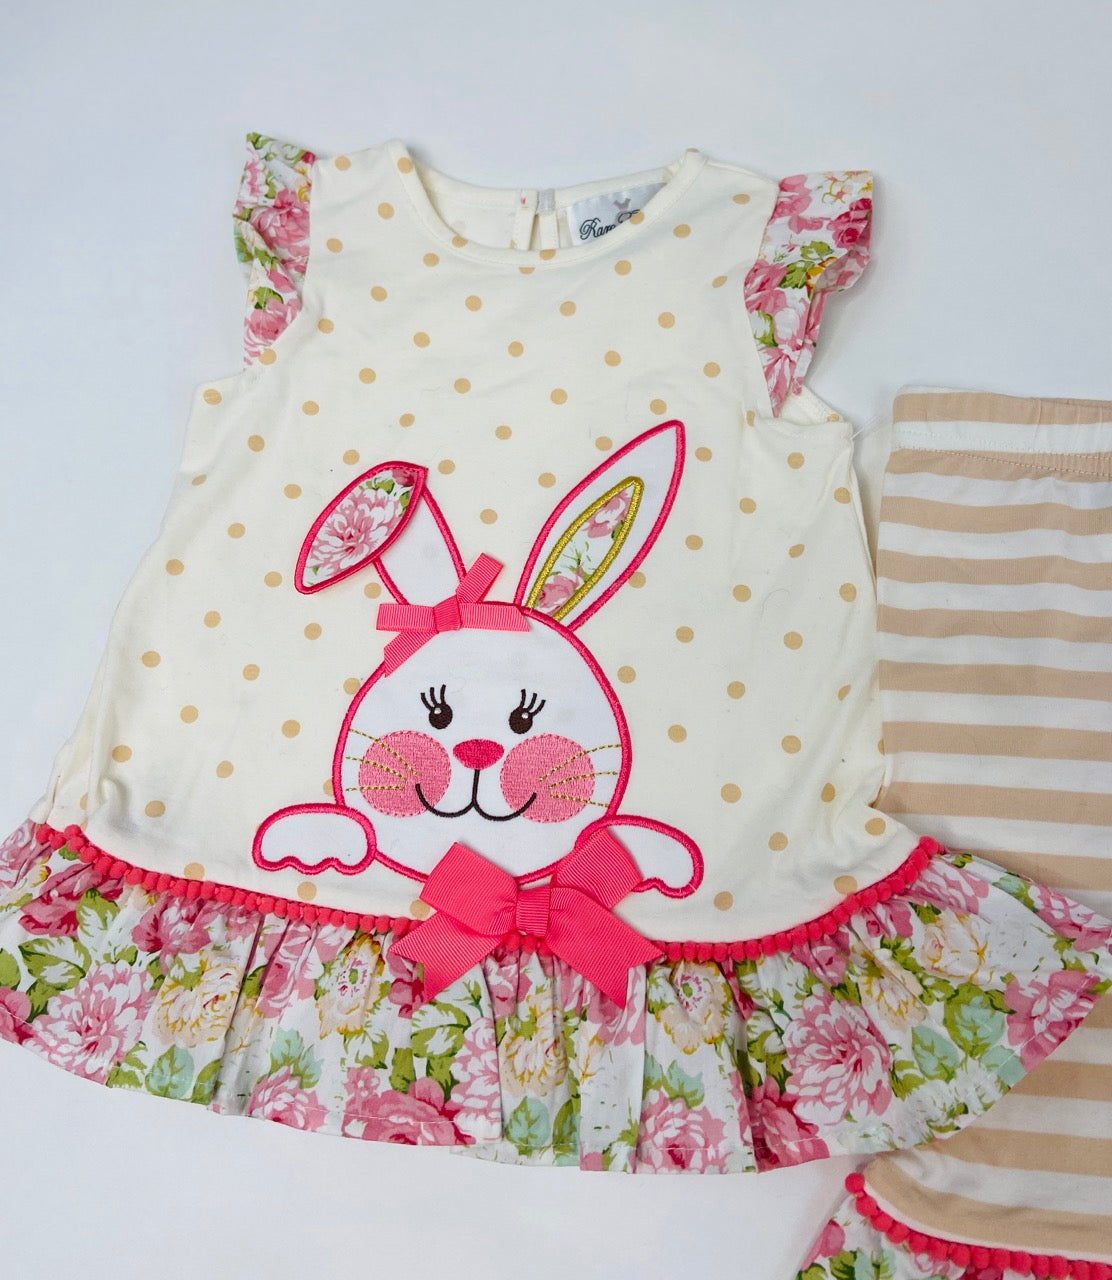 Rare Editions Oatmeal Ruffle Easter Outfit- NWT - 6 Months & 18 Months